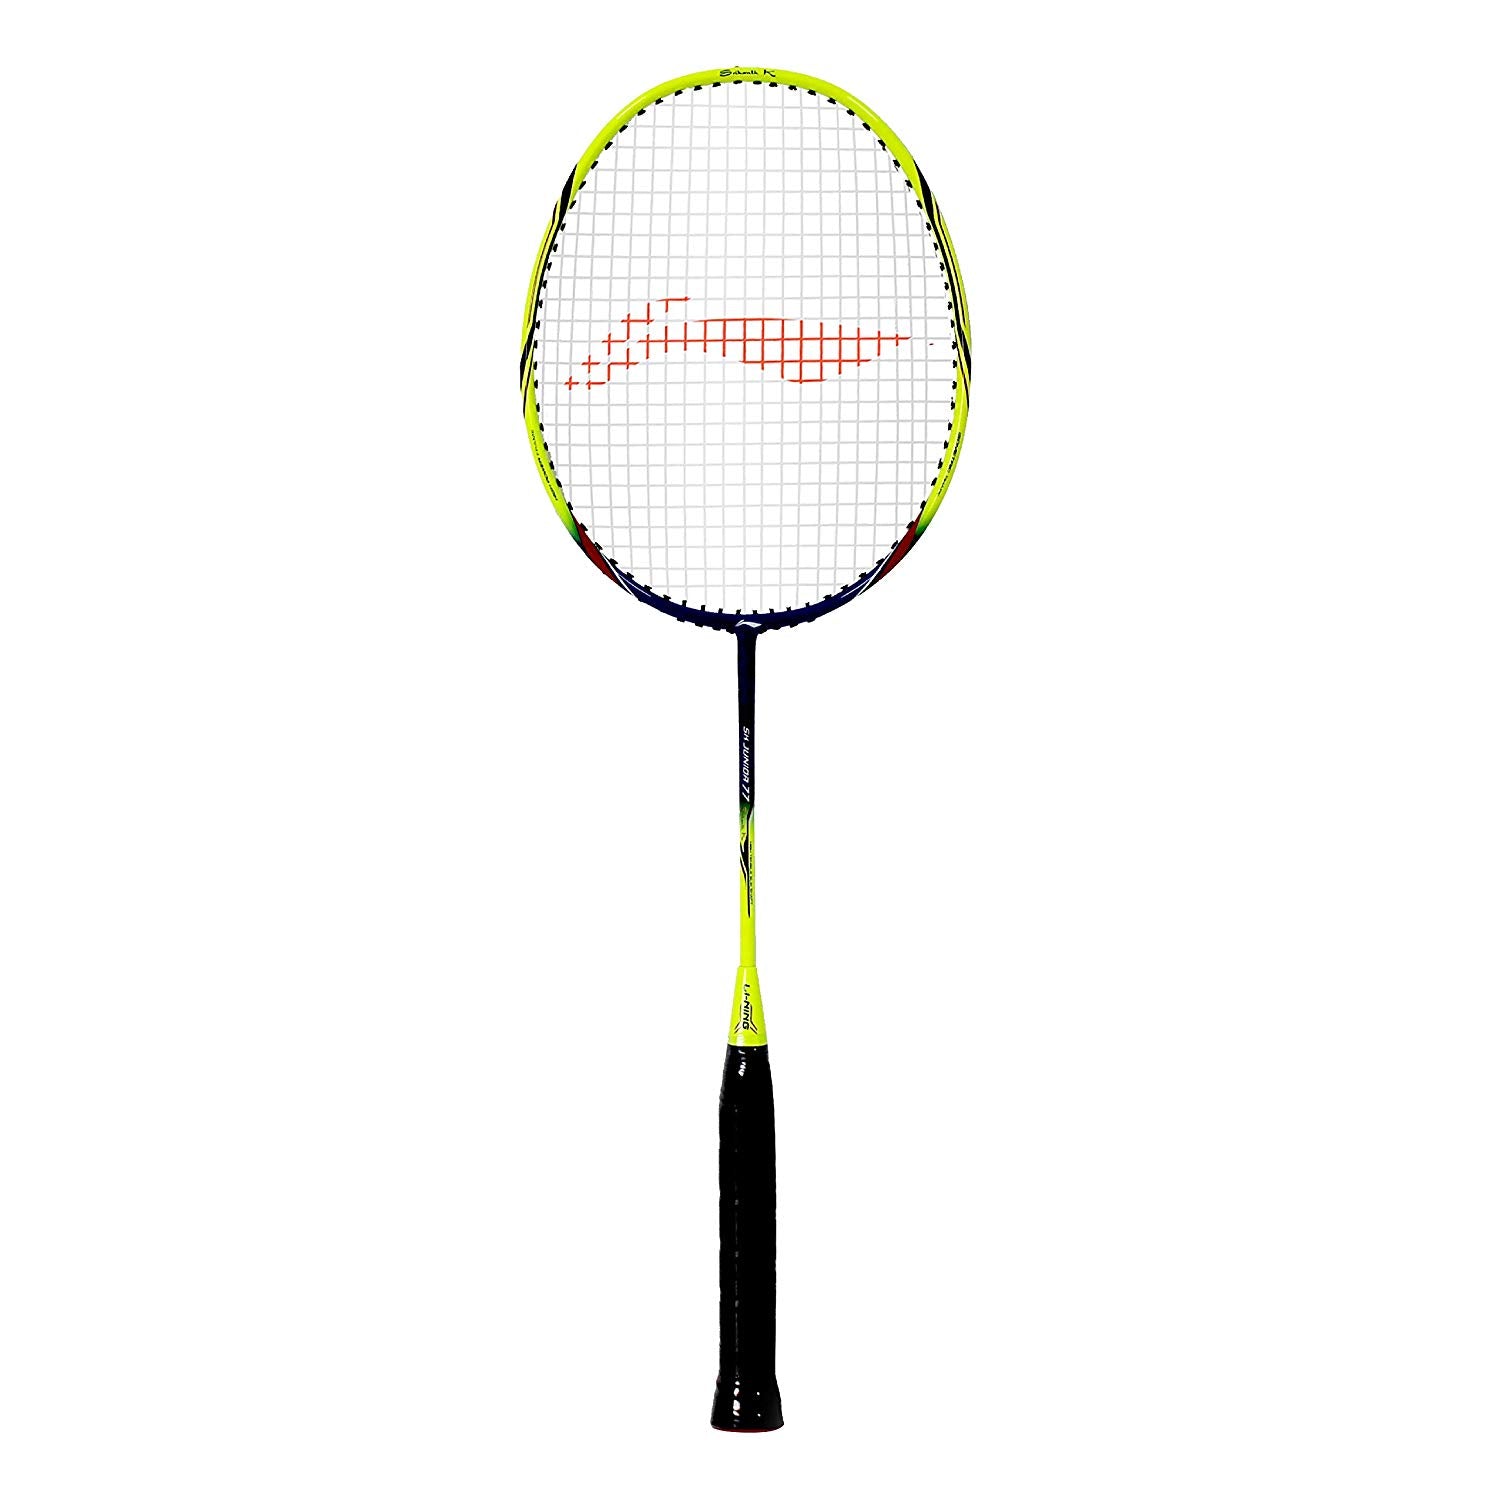 Li-Ning SK Junior 77 (Strung) Badminton Racquets with Free Head Cover